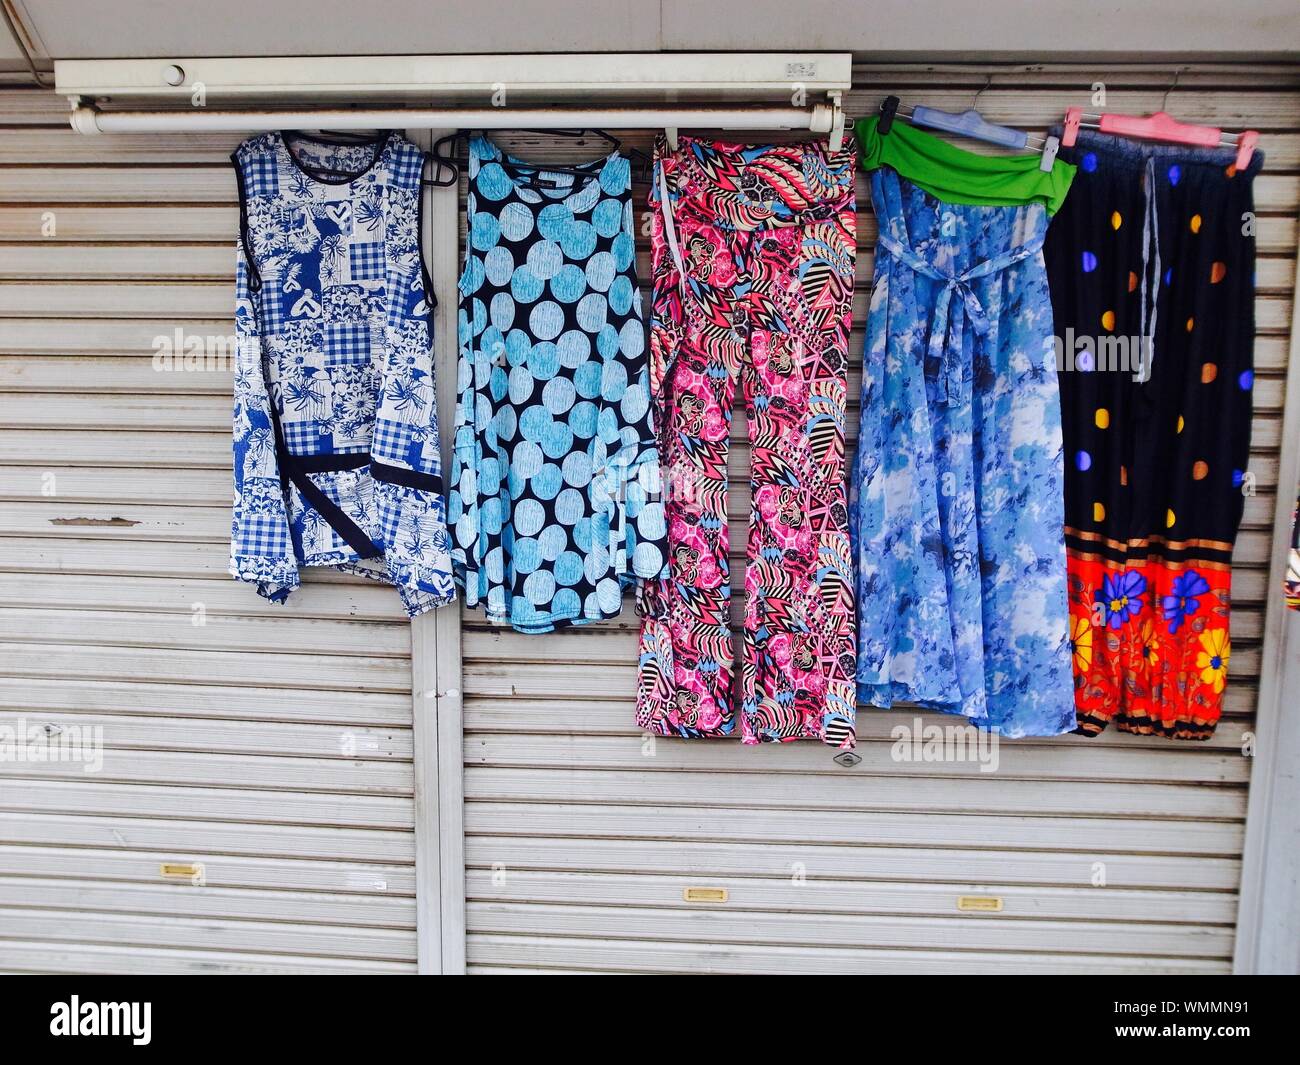 Colorful Womenswear Hanging On Closed Shutter Stock Photo